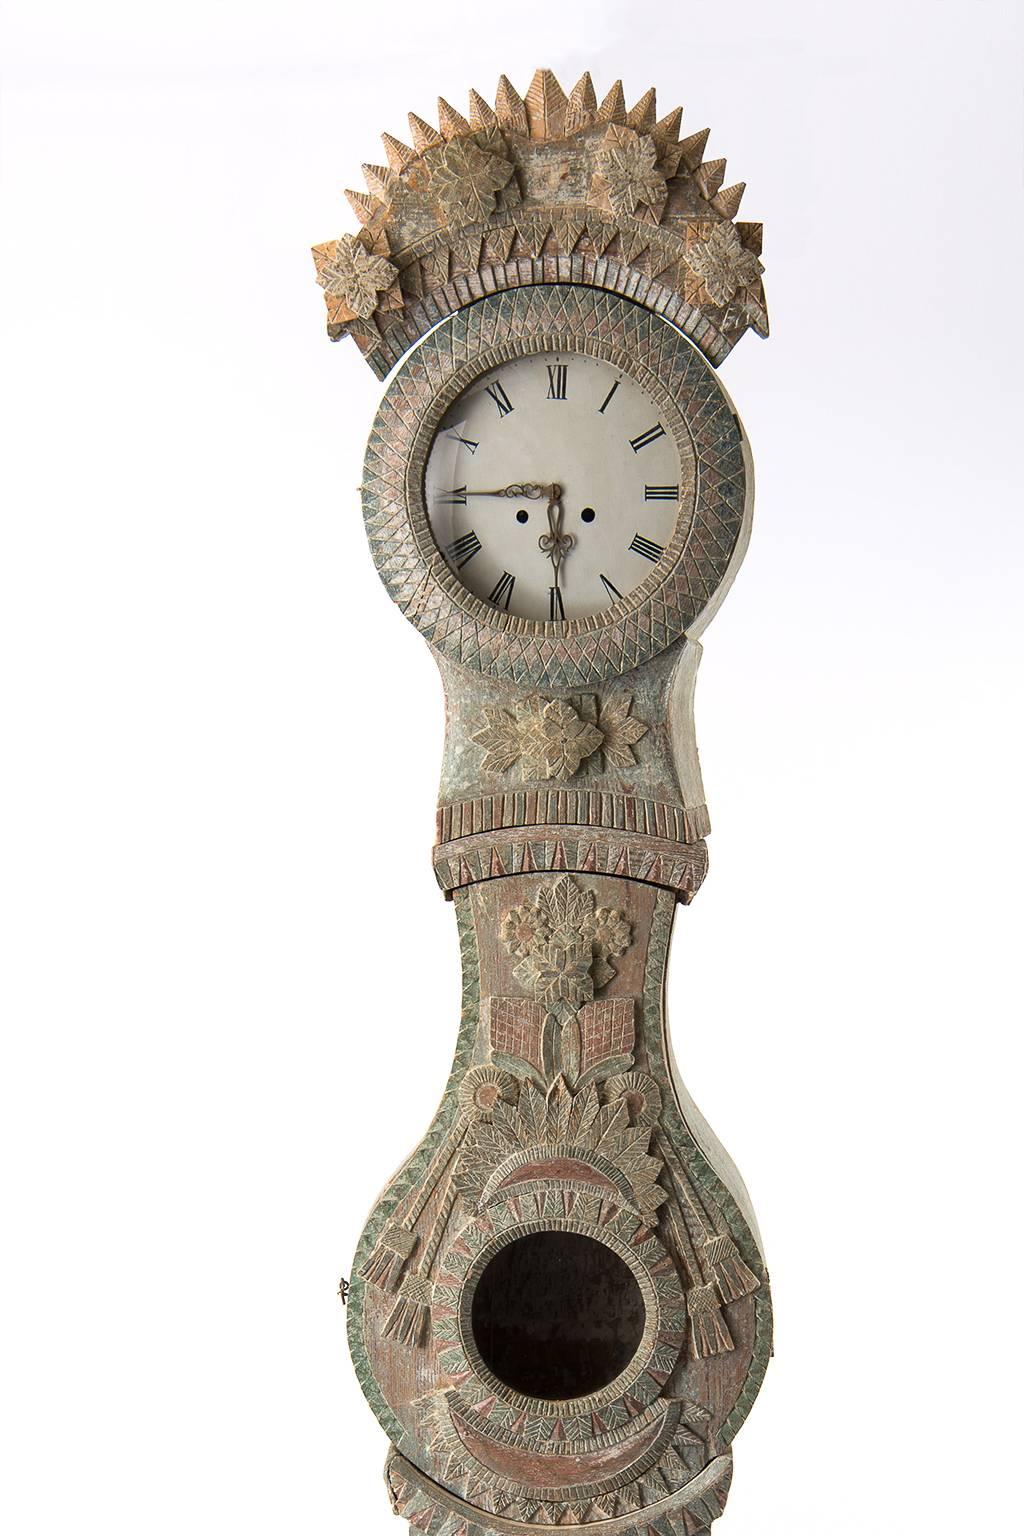 A so called bridal clock. The model is very unusual and was only made in a small geographical area in northern Sweden called Ångermanland. 
The idea of the clock was for it to resemble the bride and her dress for her upcoming wedding - hence the